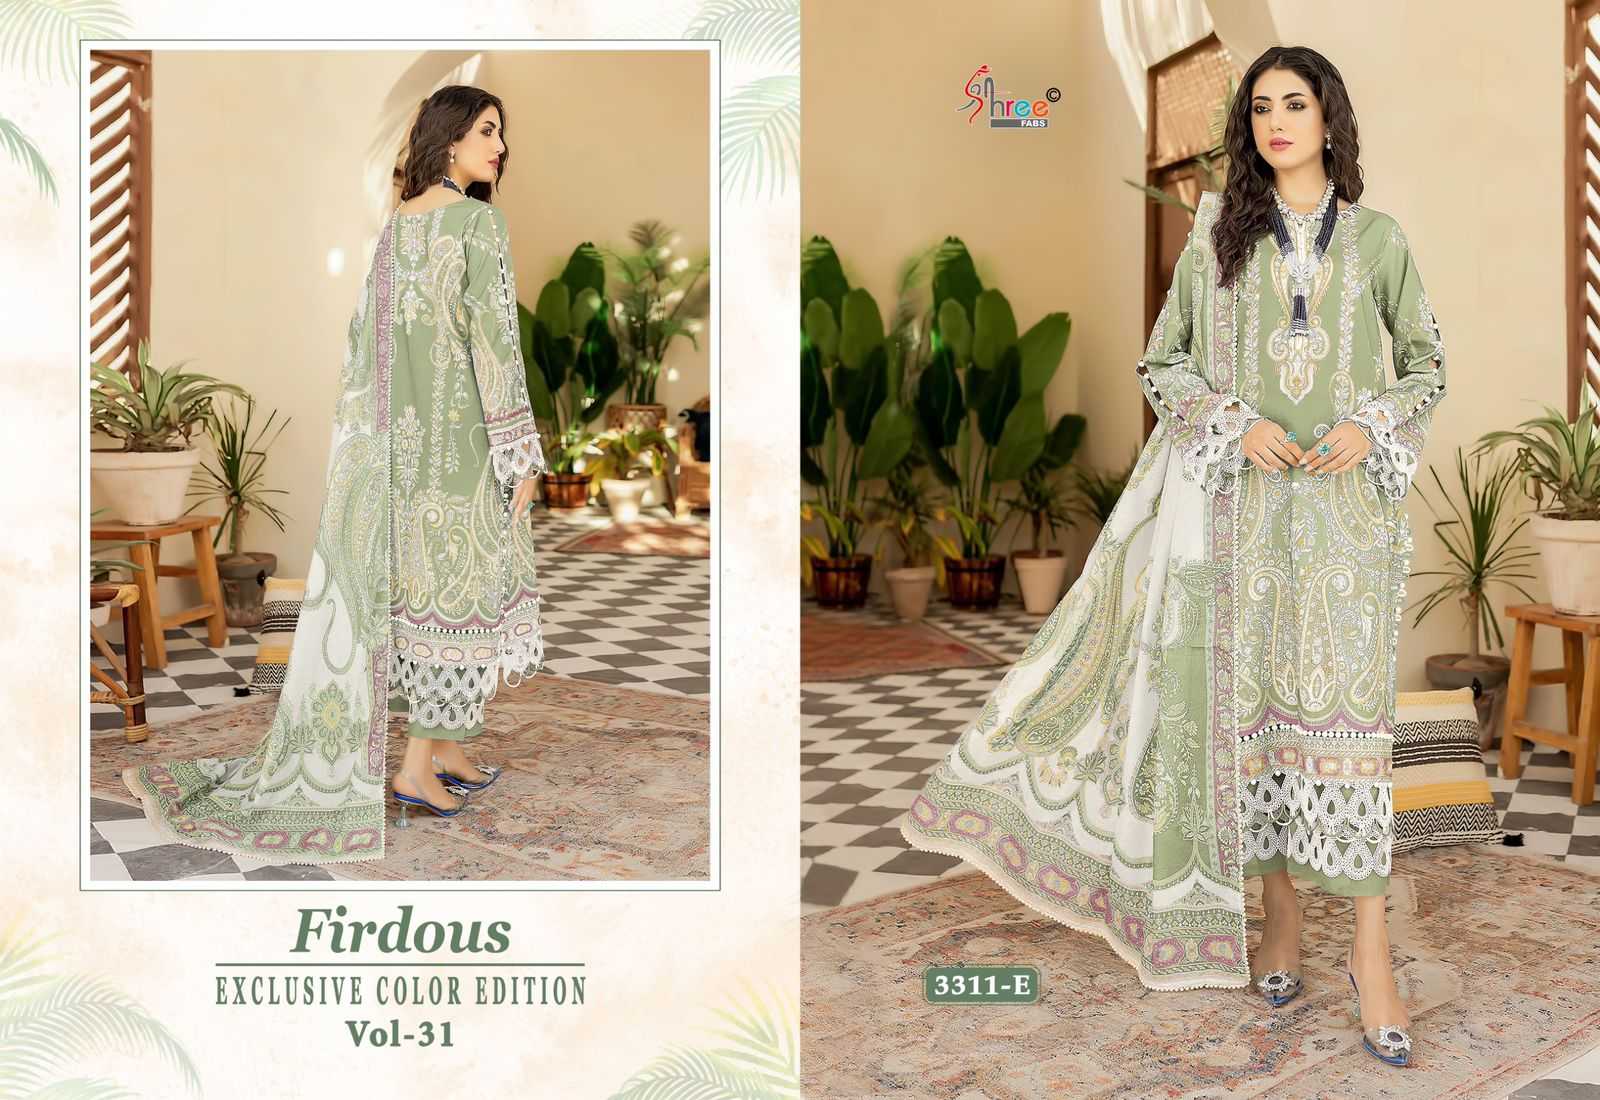 FIRDOUS EXCLUSIVE COLOR EDITION VOL 31 BY SHREE FAB COTTON PRINT EMBROIDERY PAKISTANI SUIT